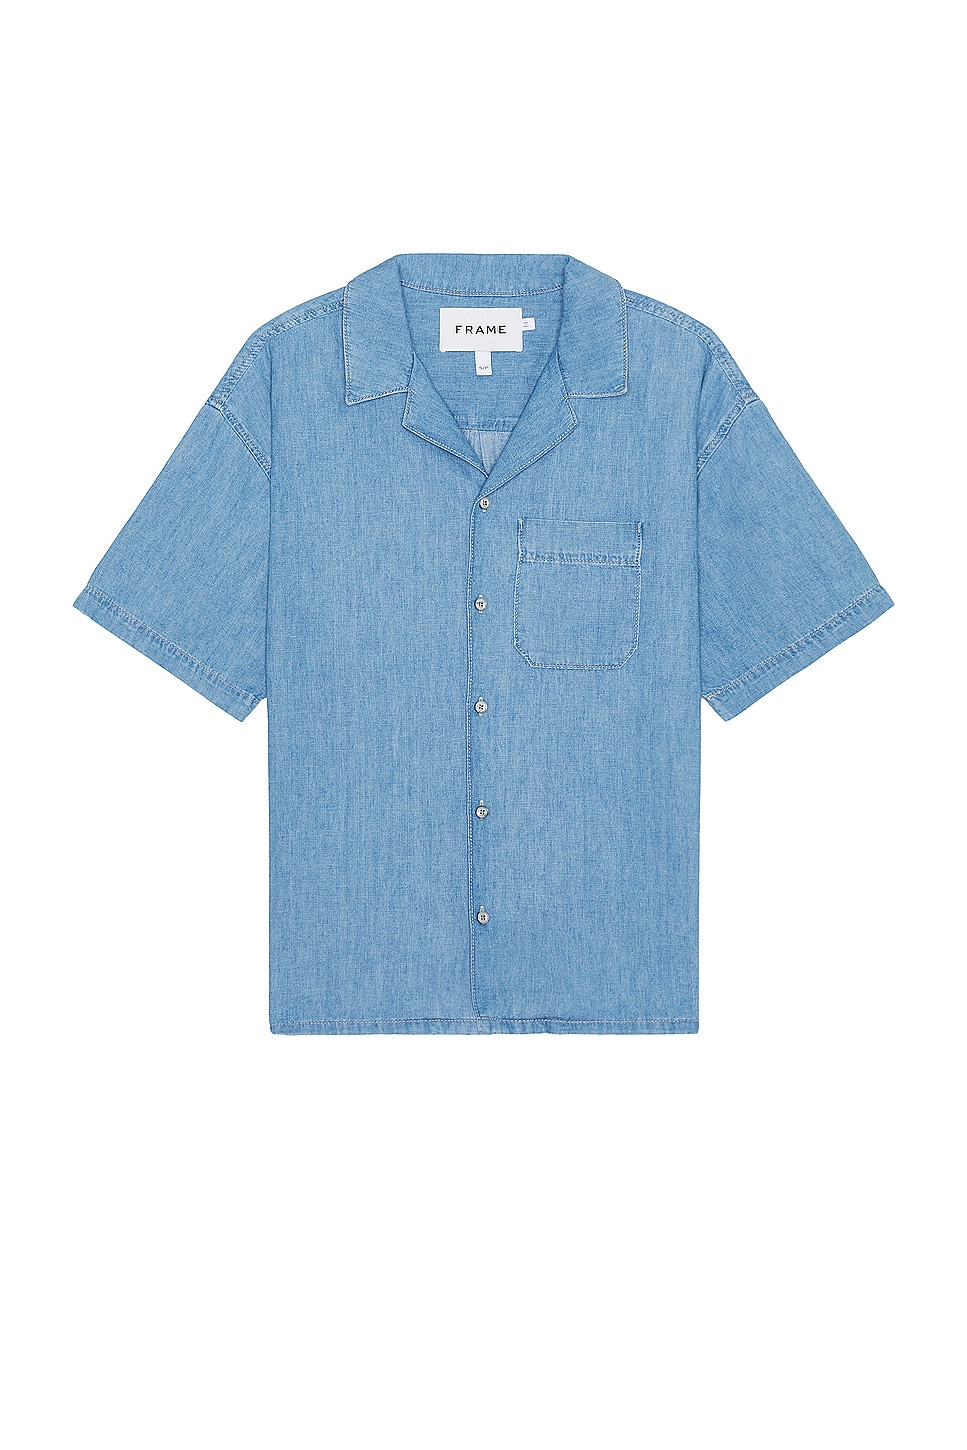 Image 1 of FRAME Chambray Camp Collar Shirt in Midland